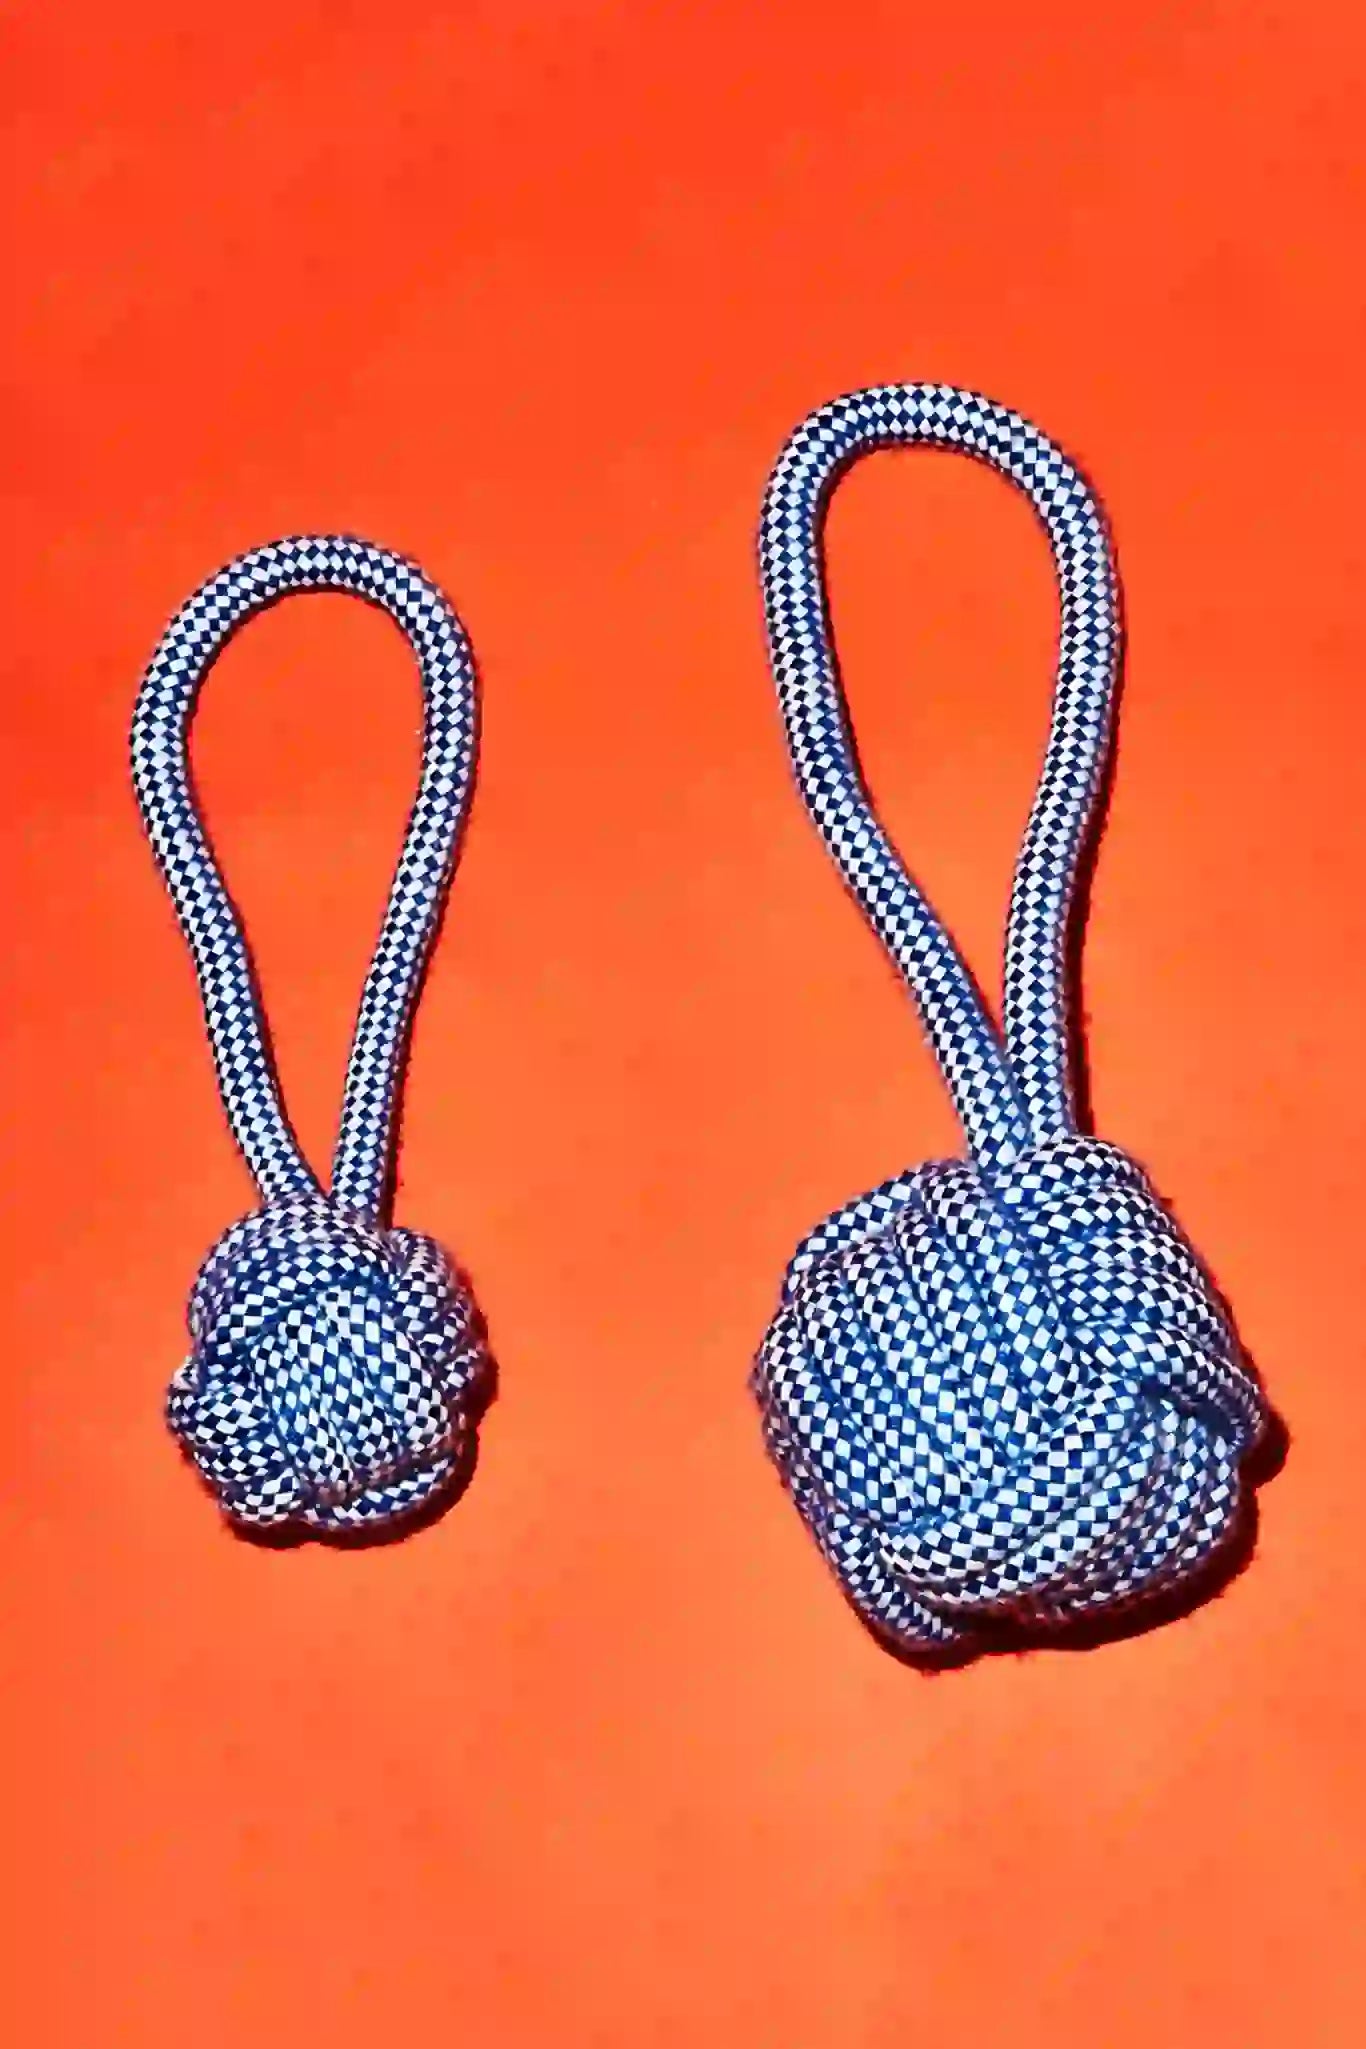 Ware of the Dog Rope Knot Toy - Blue/White